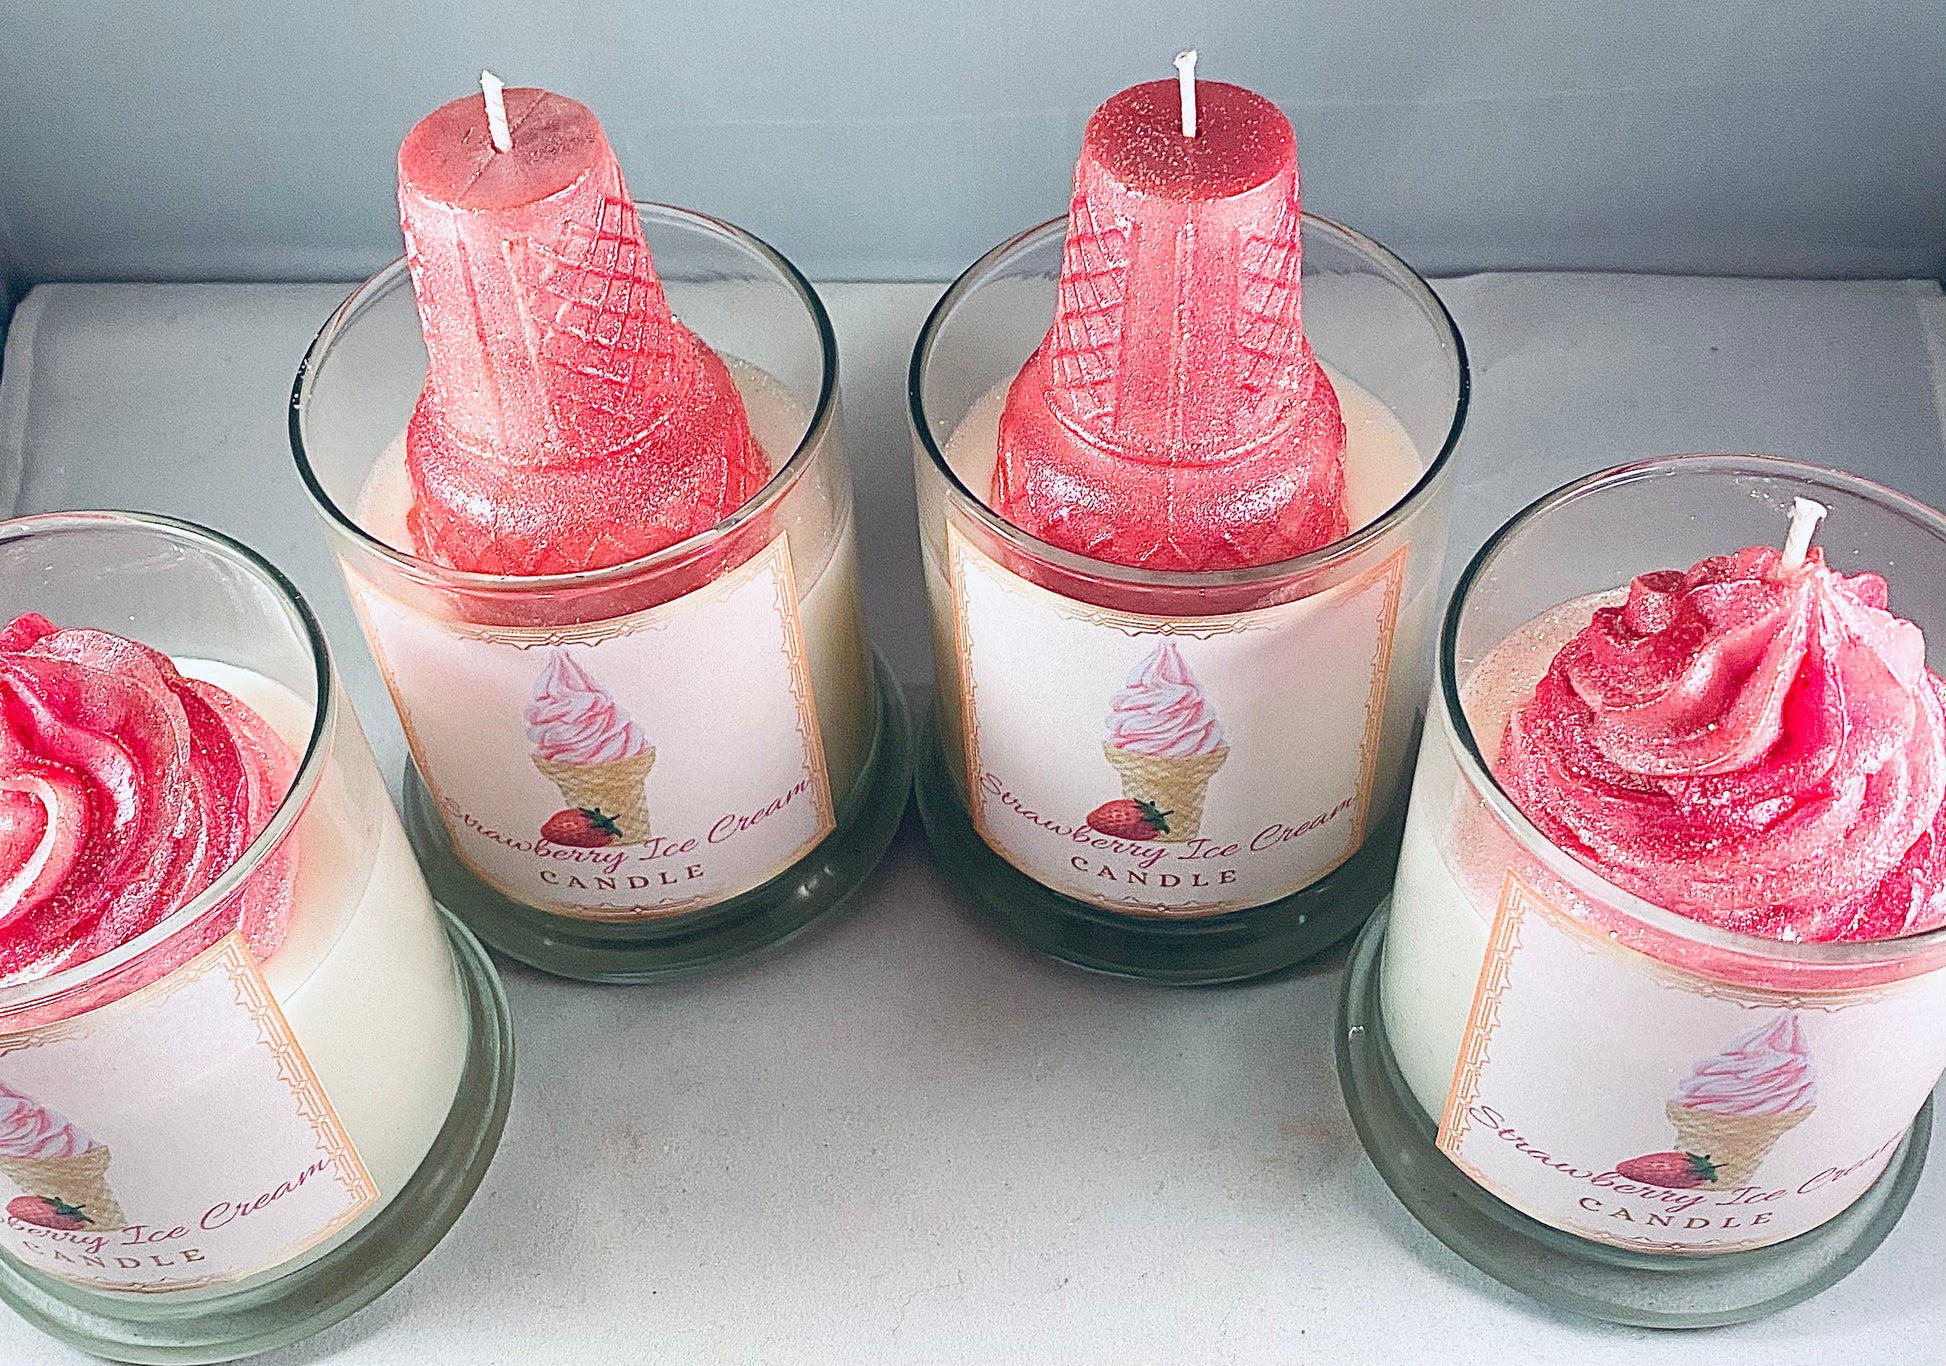 Strawberry Vine Candle – Sand Hill Candles & melts